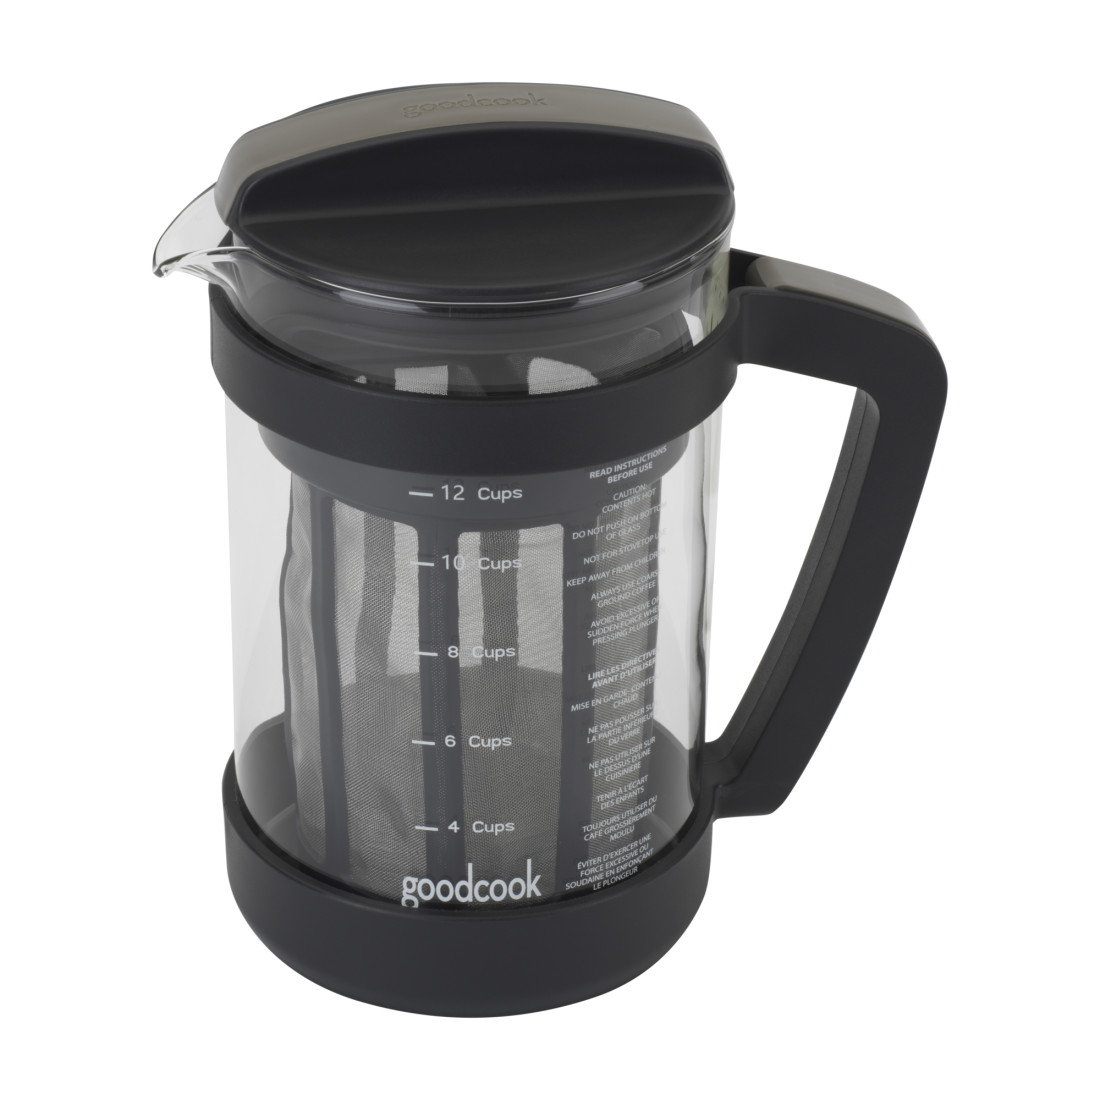 Beverage Maker with Glass Stew Pot 1.5L